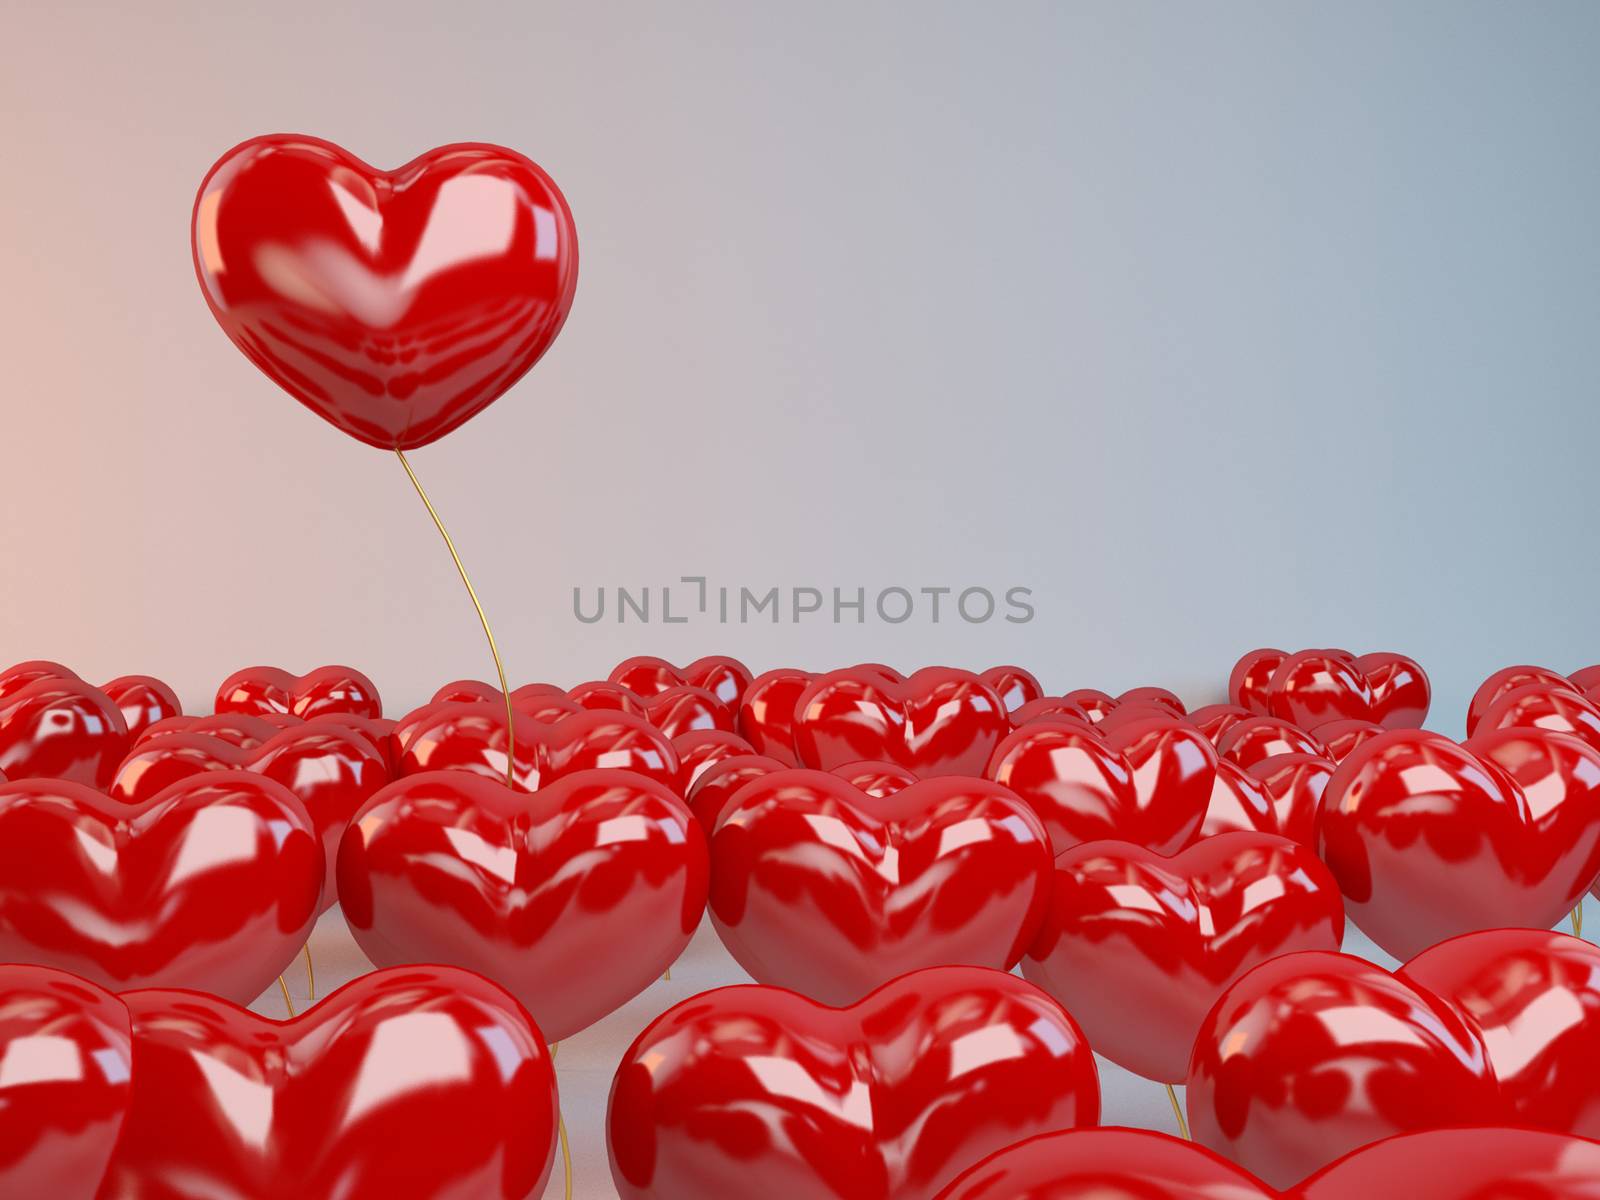 Group of red hearts balloons by fares139